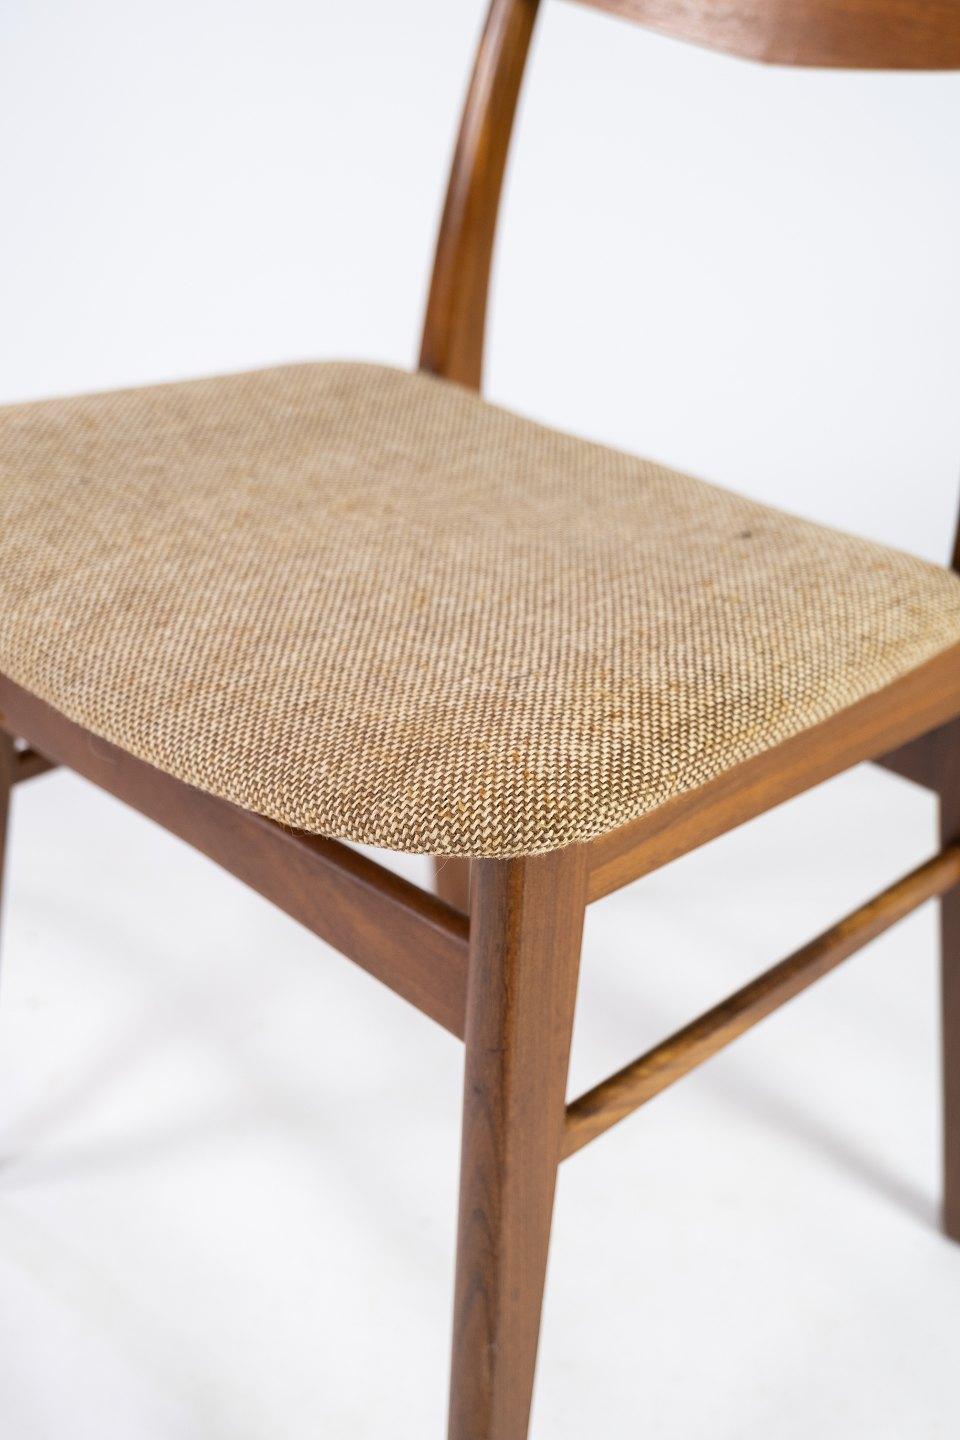 Scandinavian Modern Dining Room Chair in Teak and Light Fabric of Danish Design from the 1960s For Sale